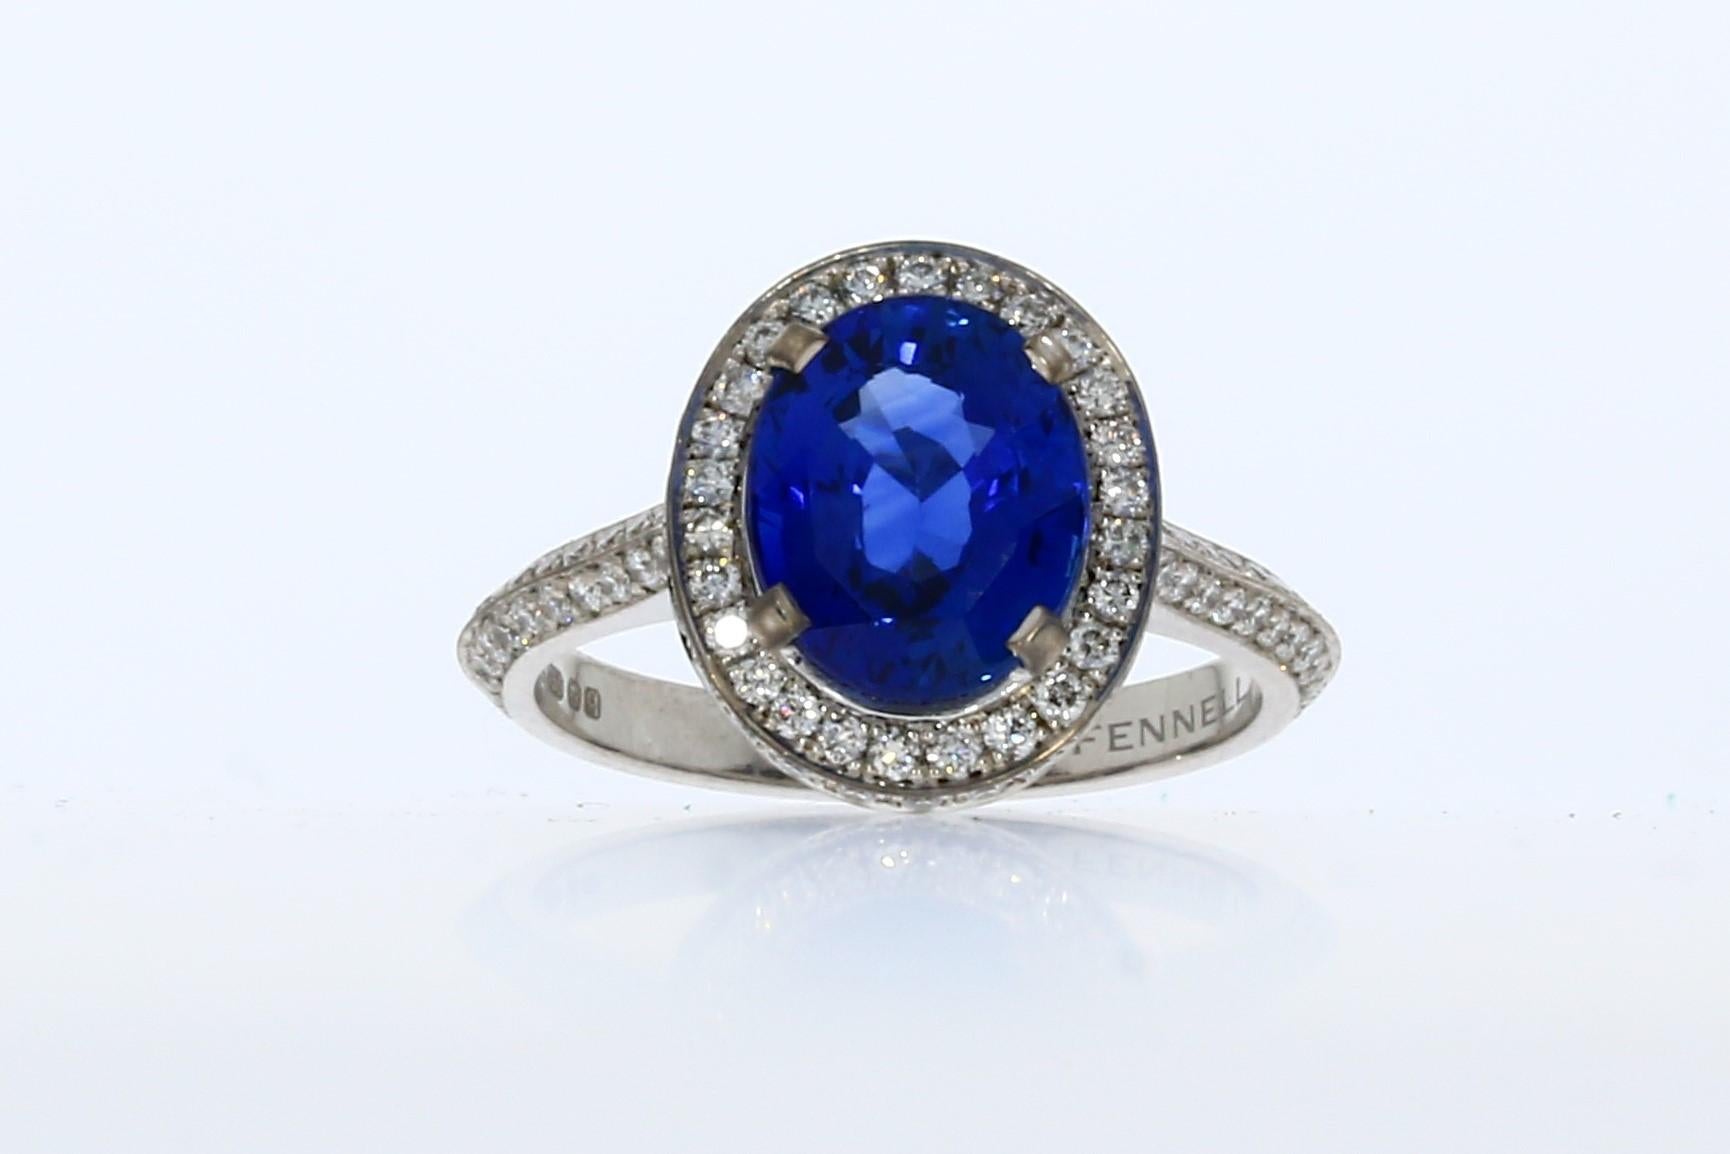 18ct White Gold, 2.03ct Sapphire & 0.70ct Diamond Pave Halo Ring
Finger Size K
